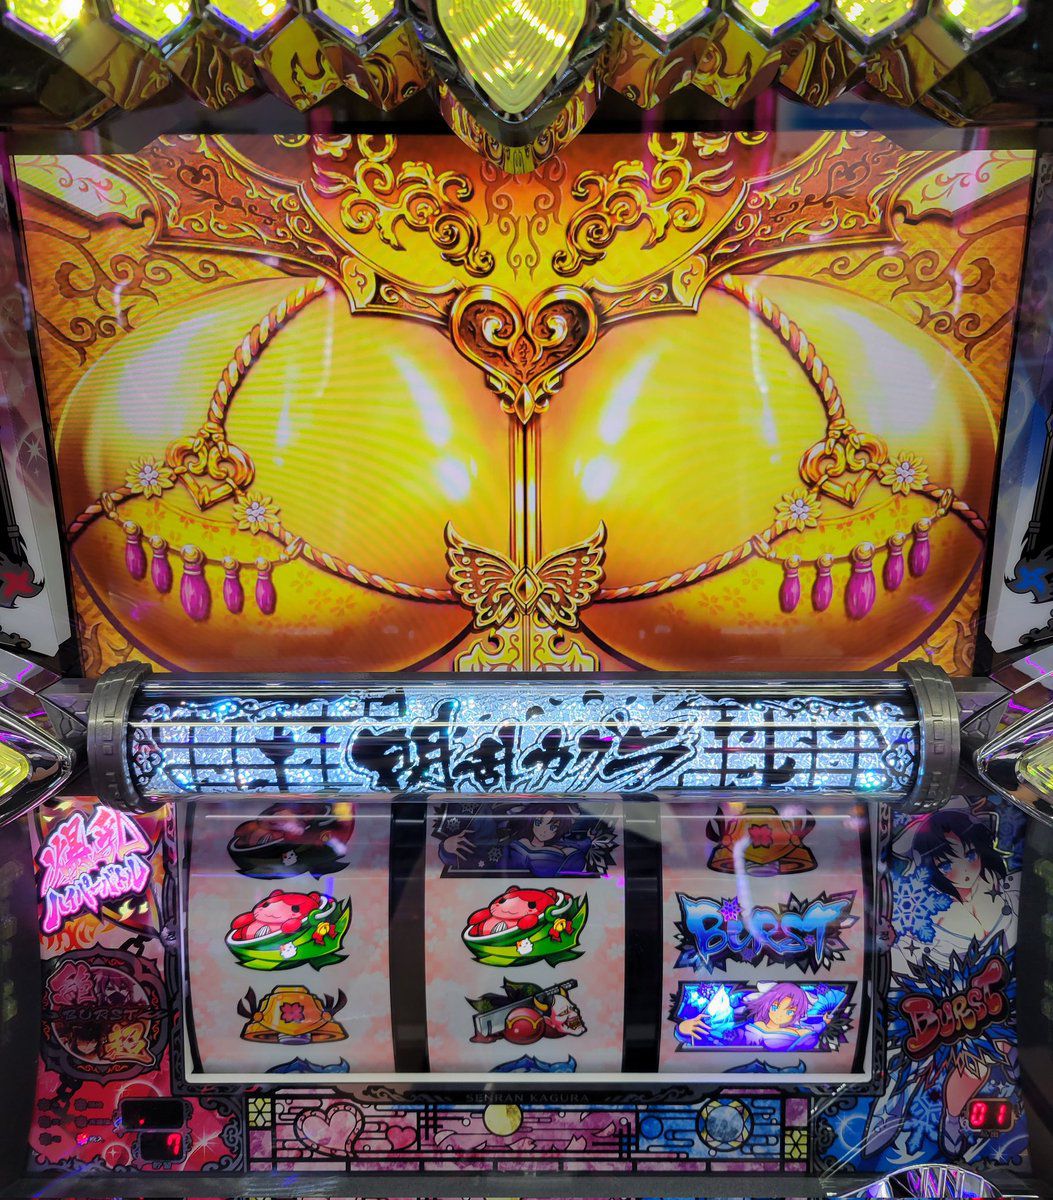 【Image】Recent pachinko sea story, a little too erotic 14